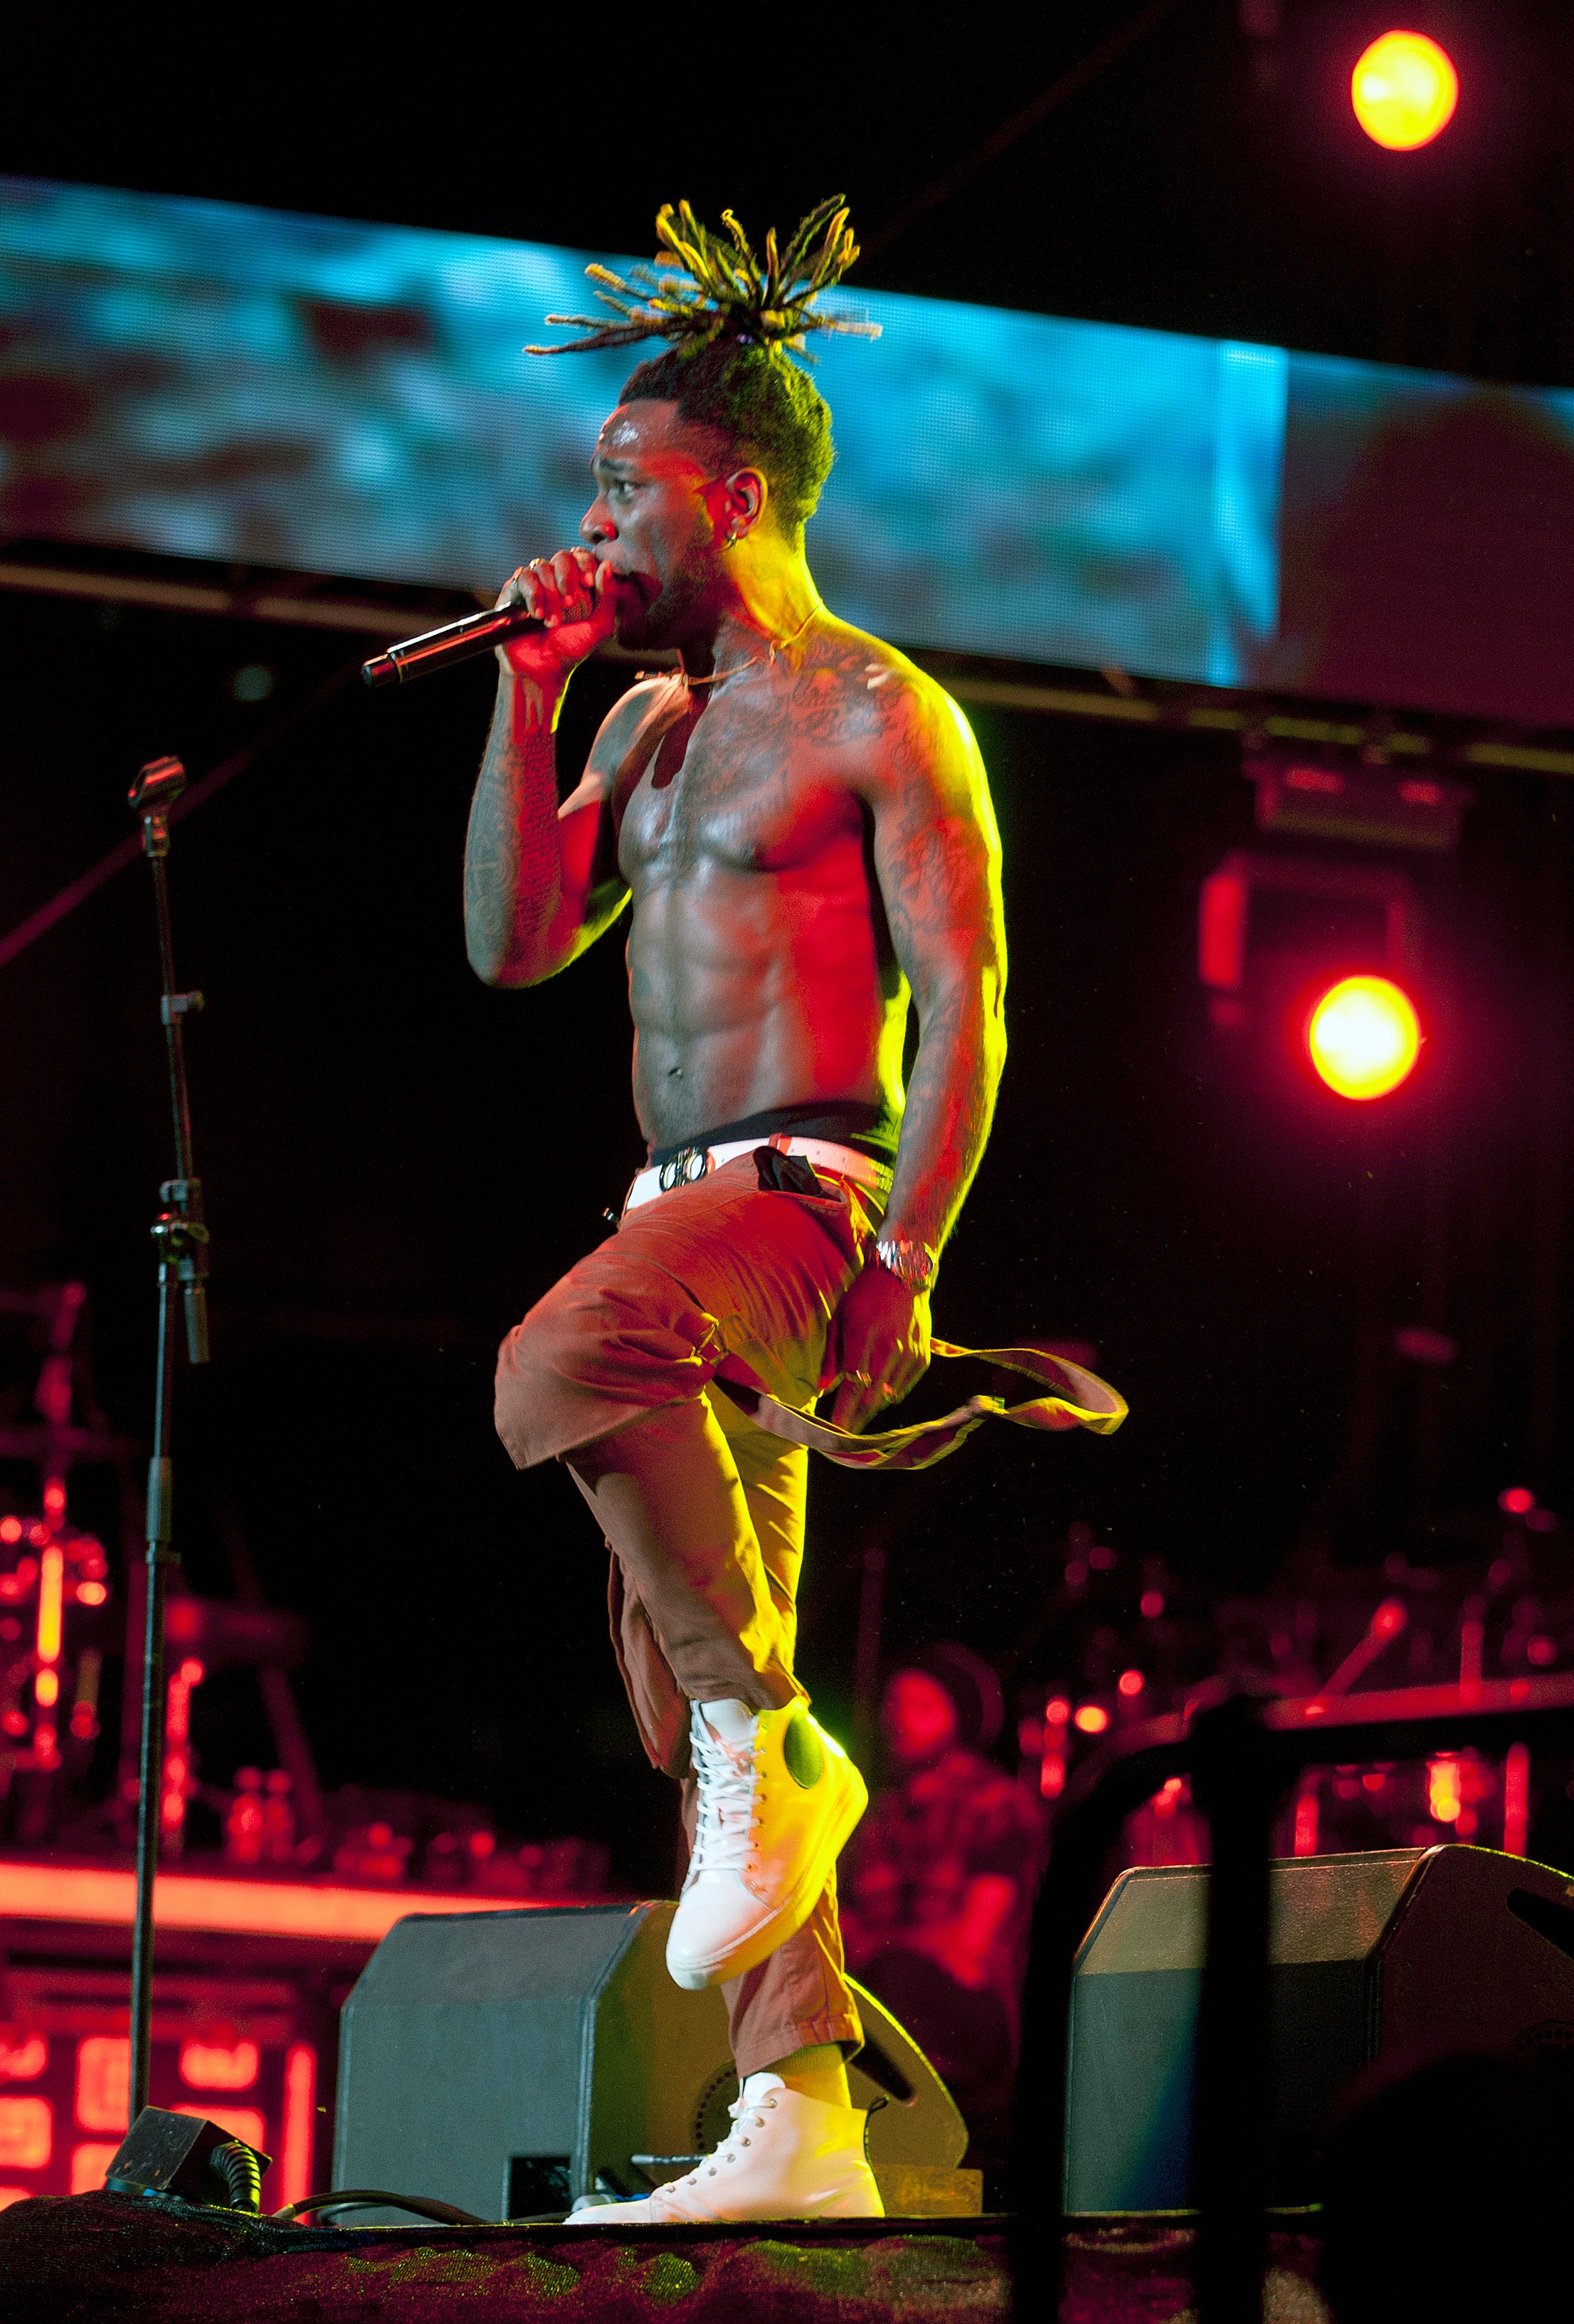 ESSENCE Festival Is Heading Back To Durban! Here's A Look At What You Missed Last Year
